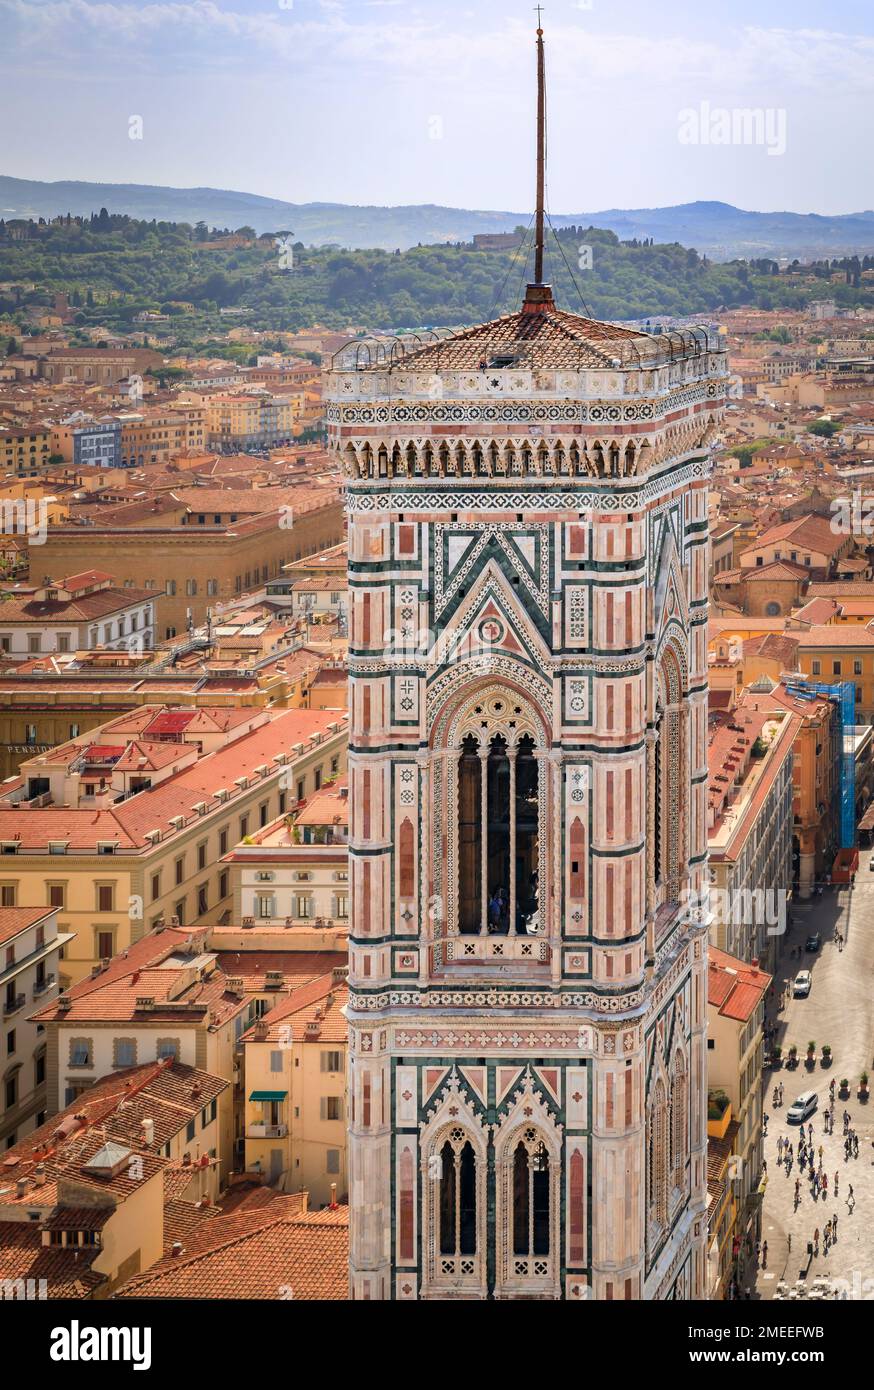 Aerial view of the Giotto Campanile bell tower of Duomo Cathedral or Cattedrale di Santa Maria del Fiore and Giotto bell tower in Florence, Italy Stock Photo